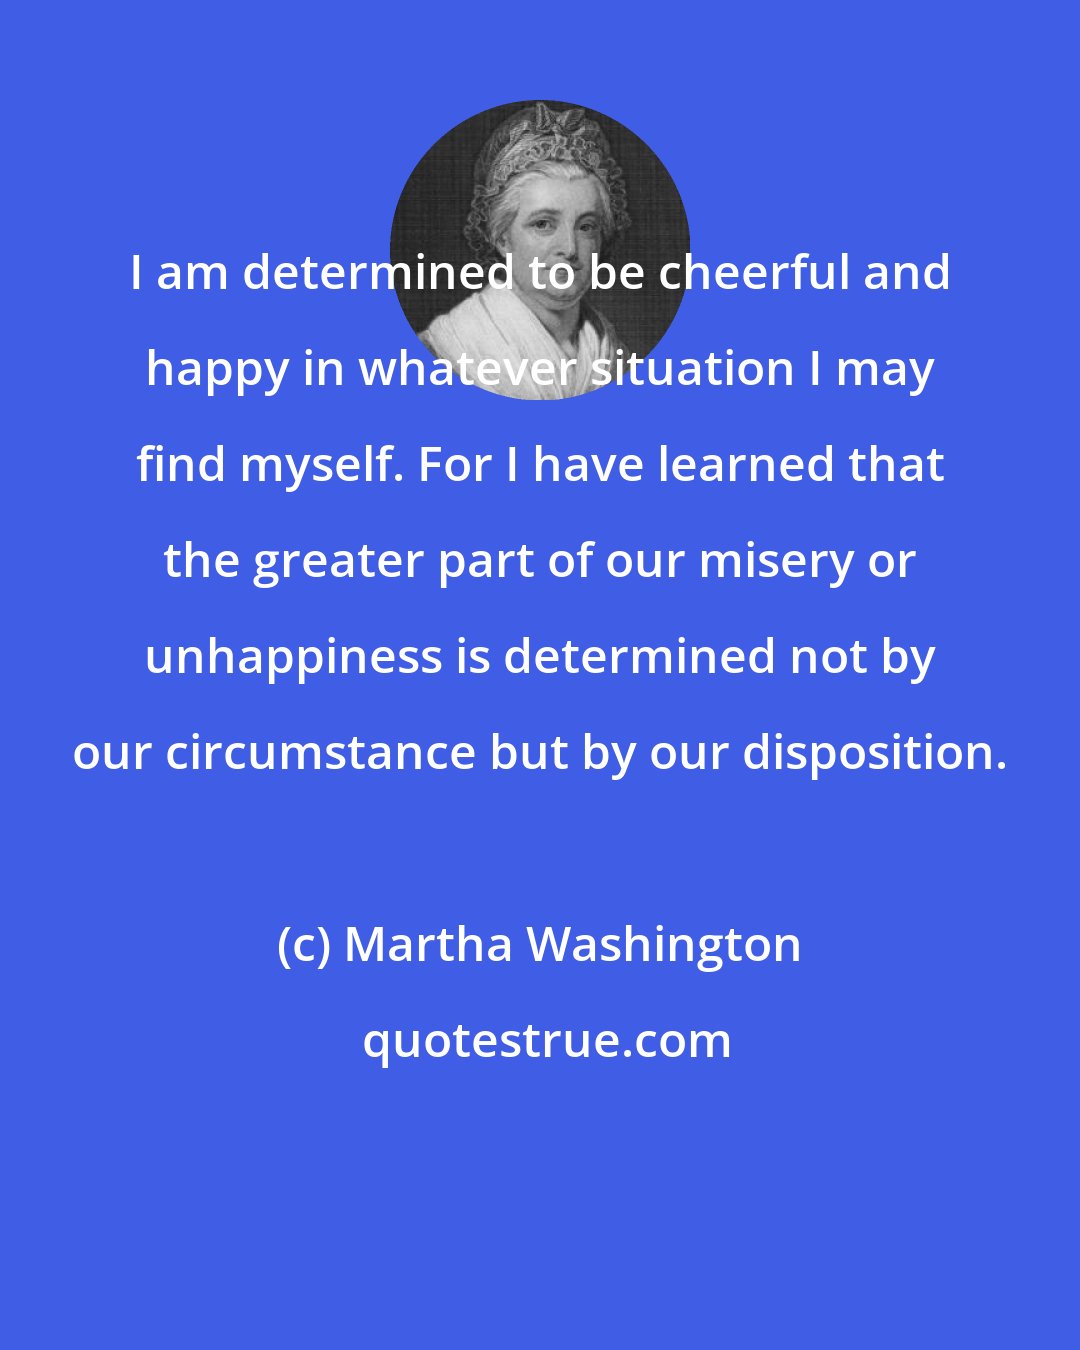 Martha Washington: I am determined to be cheerful and happy in whatever situation I may find myself. For I have learned that the greater part of our misery or unhappiness is determined not by our circumstance but by our disposition.